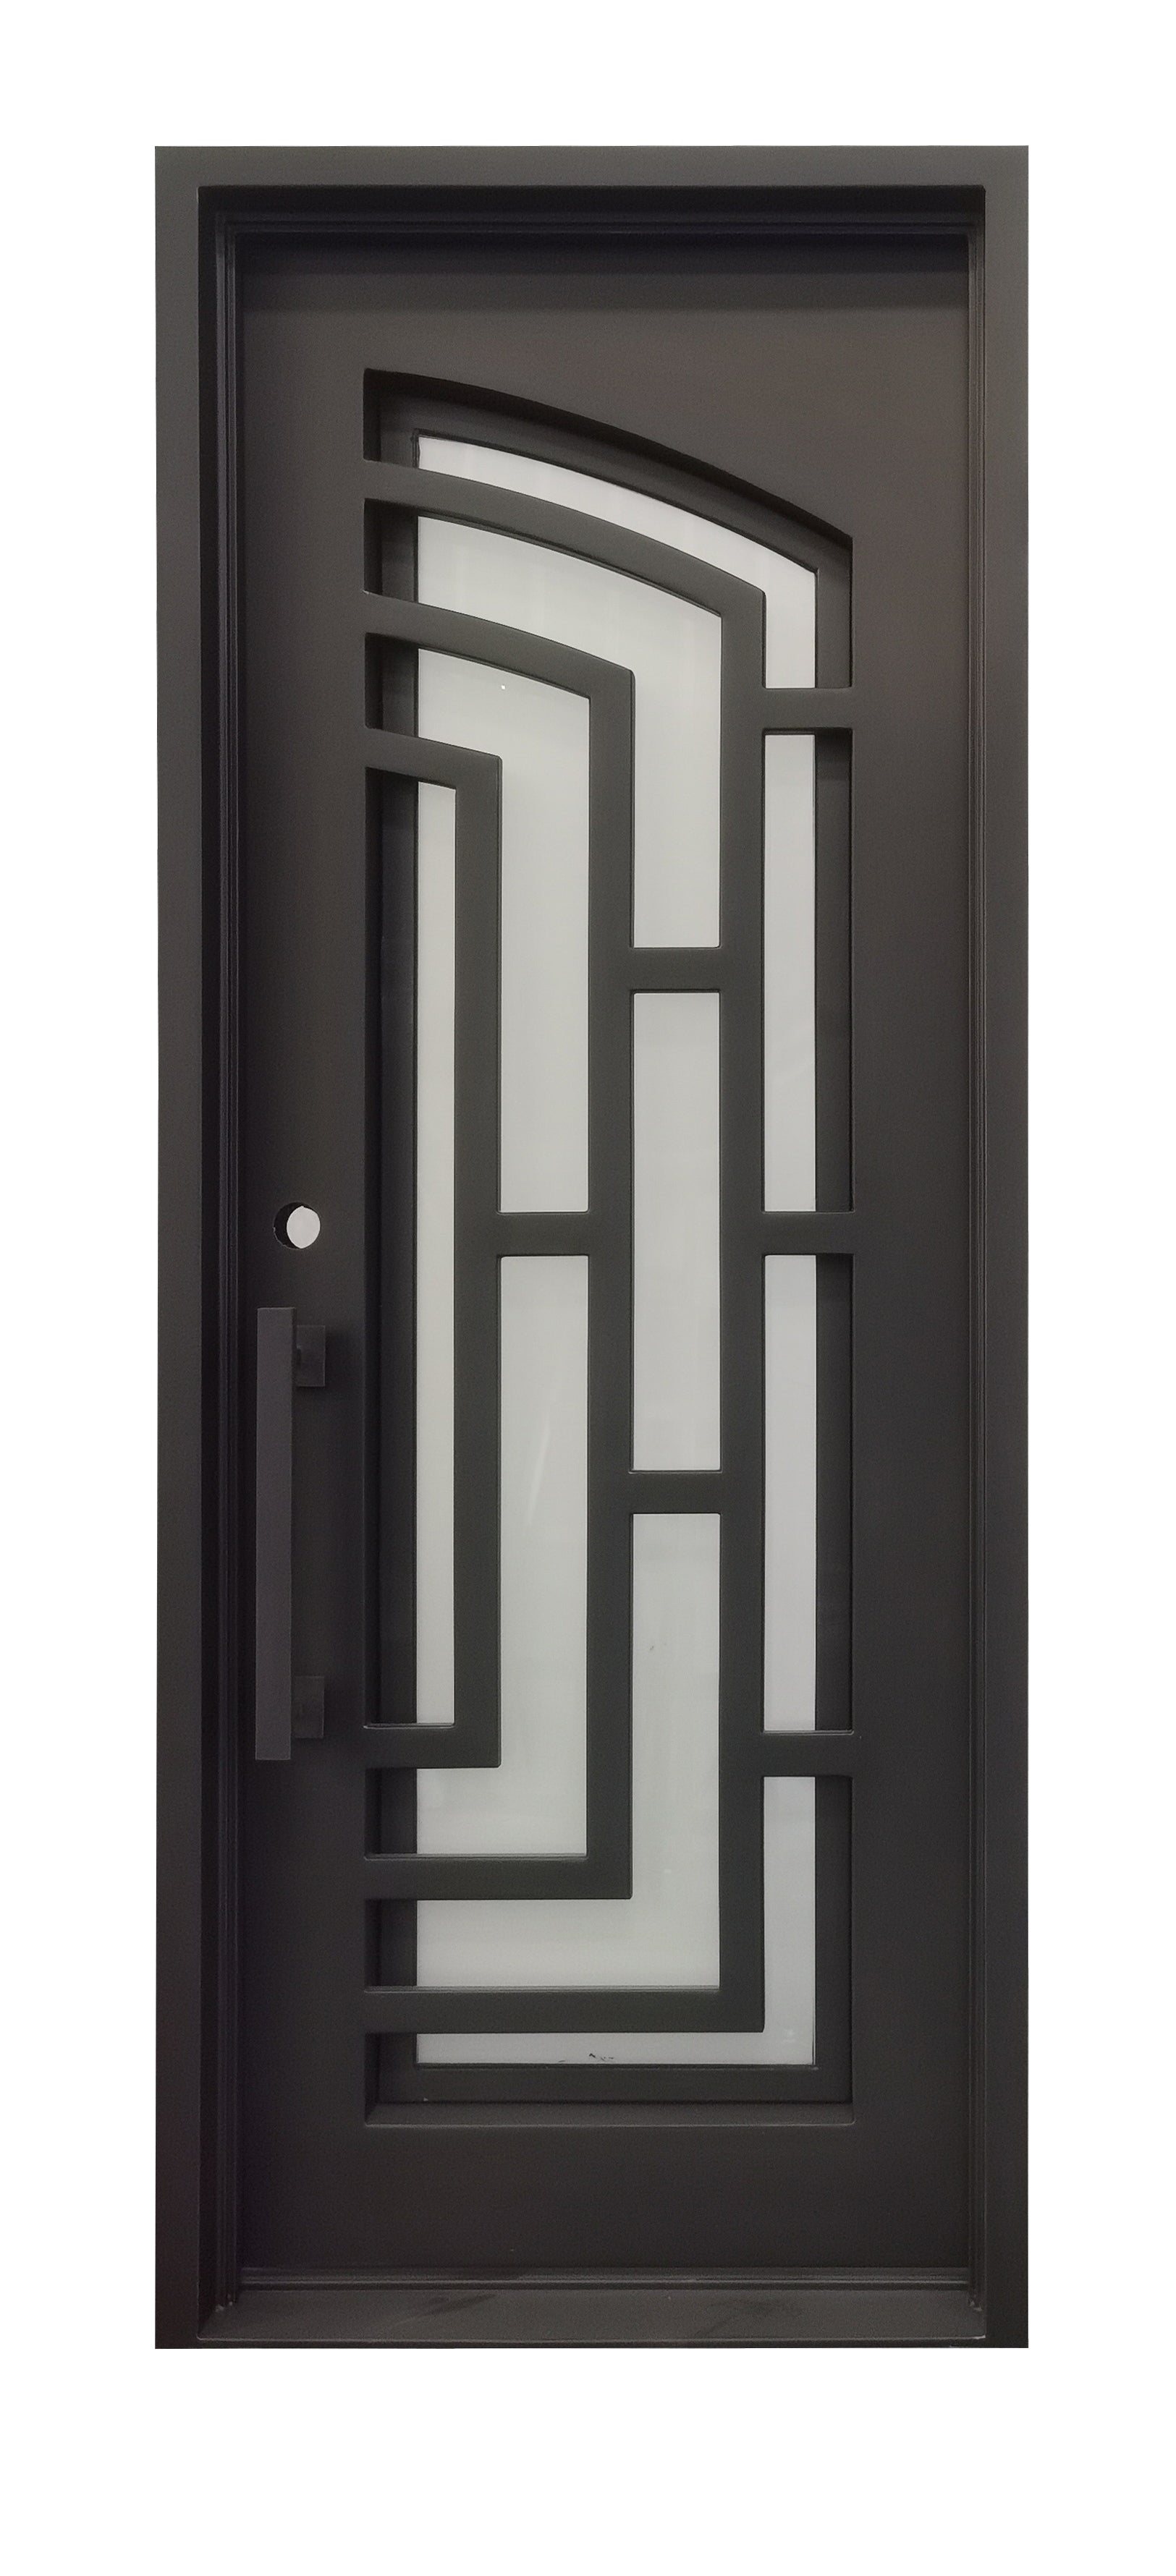 Belton Model Pre Hung Single Front Entry Wrought Iron Door With Frosted Glass Dark Bronze Finish